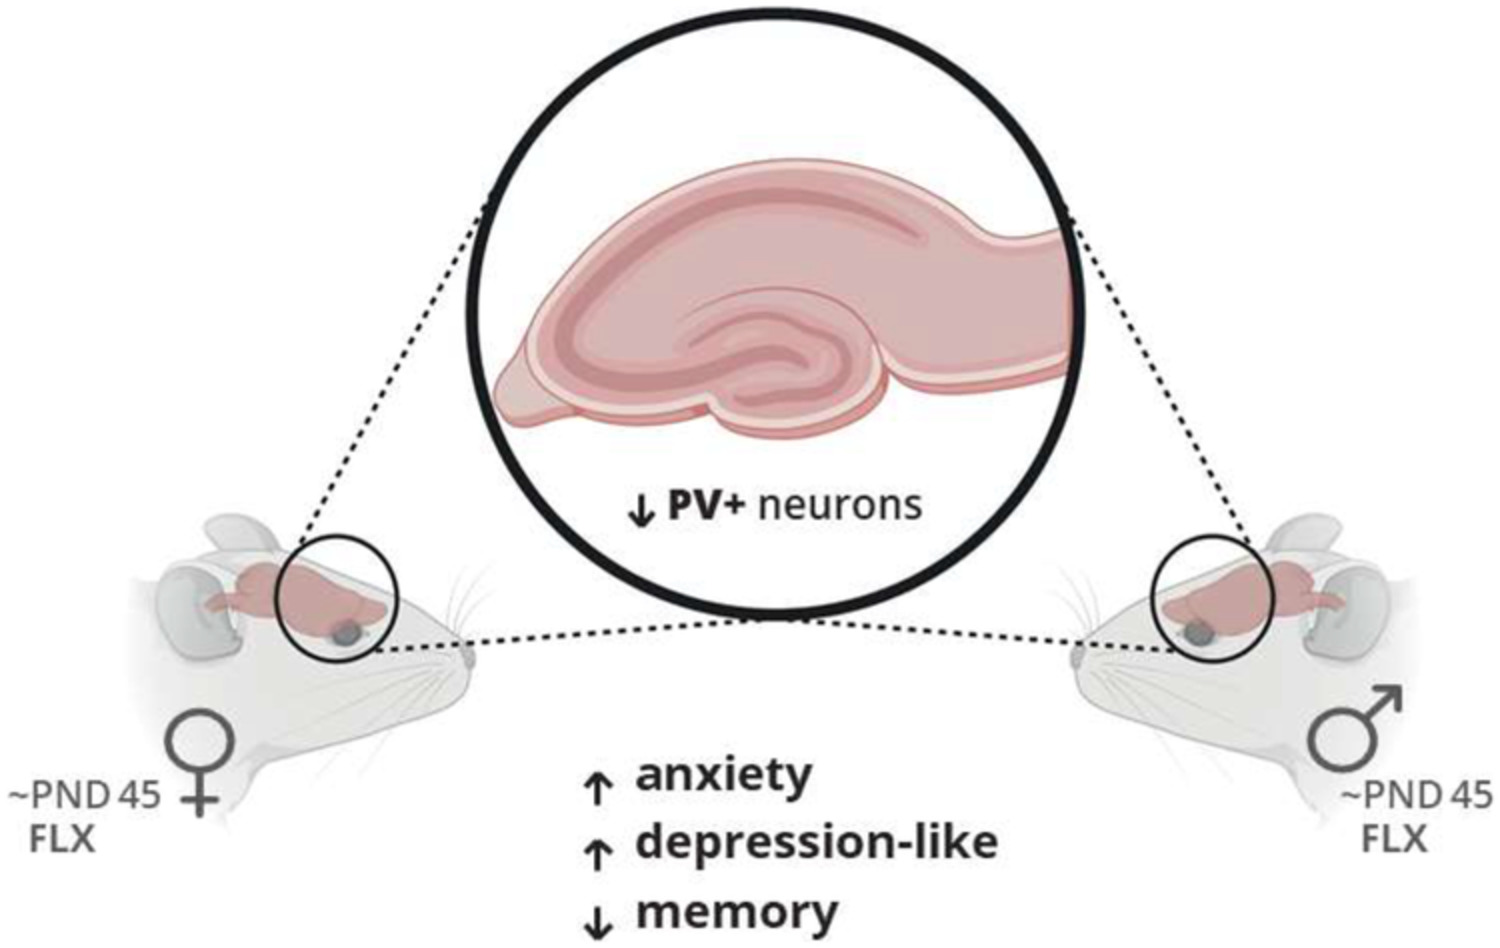 Postnatal exposure to fluoxetine led to cognitive‐emotional alterations and decreased parvalbumin positive neurons in the hippocampus of juvenile Wistar rats